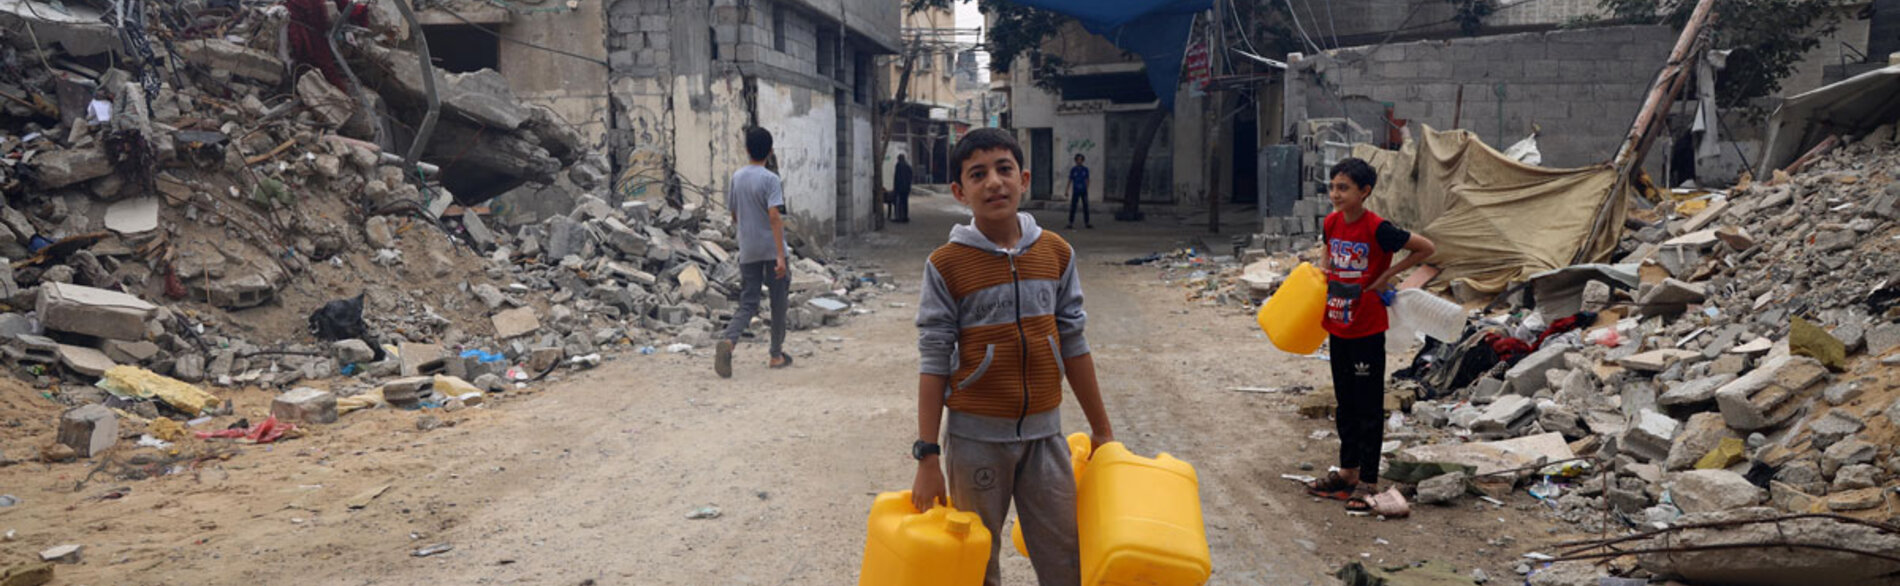 A child carrying empty jerry cans on his way to refill them with drinking water. "I dream of becoming an astronaut," he says. Photo by © UNICEF/El Baba